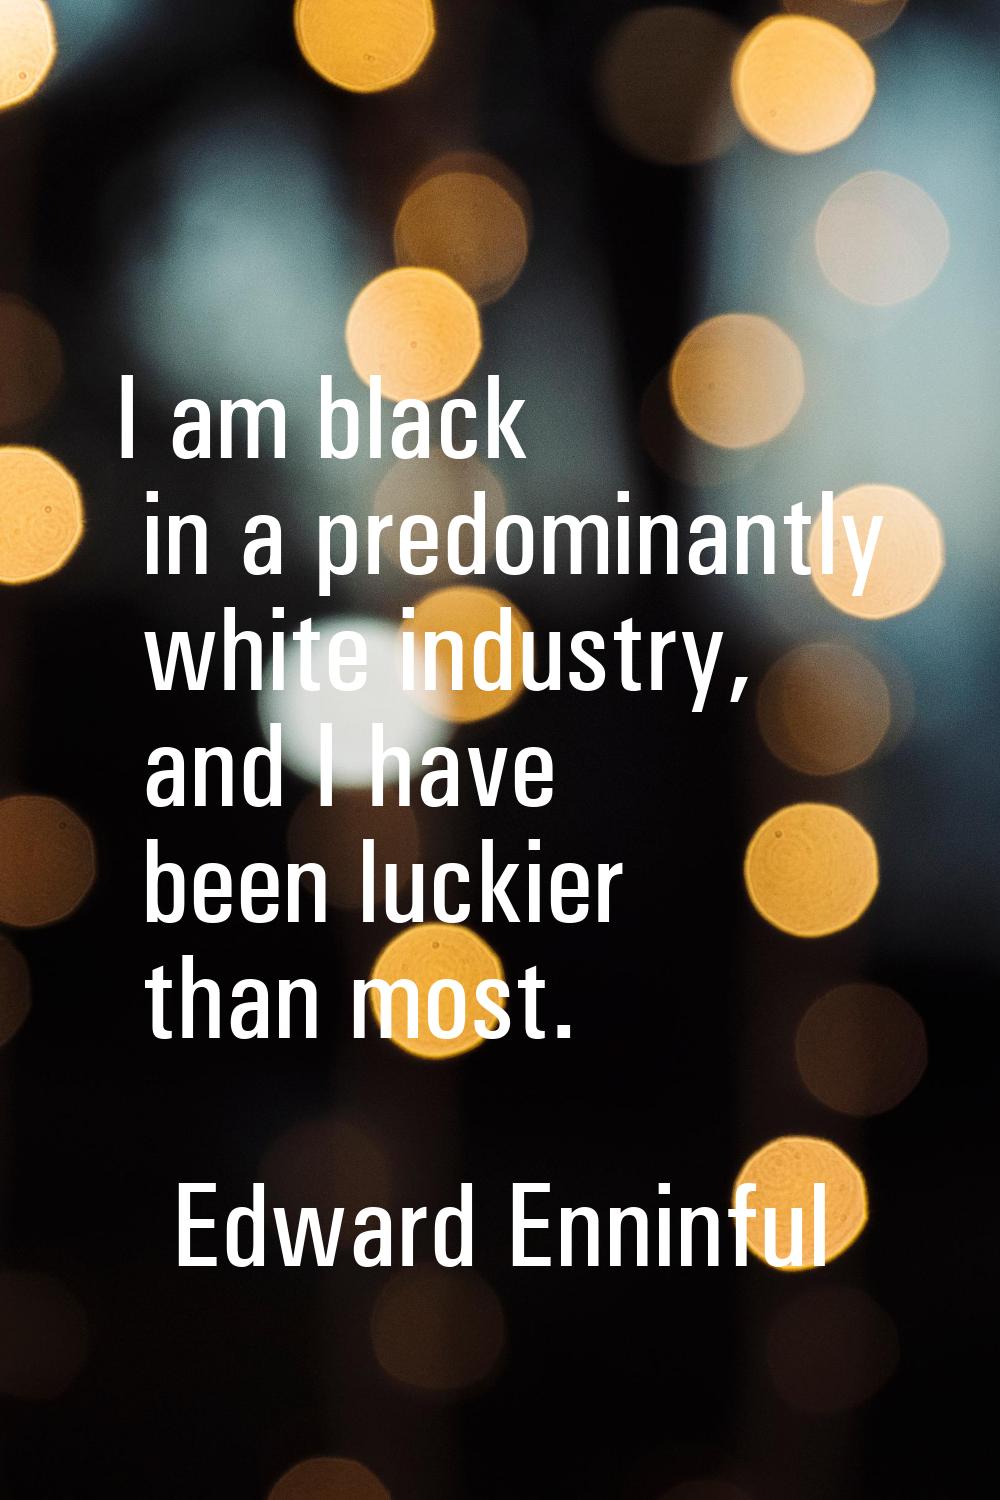 I am black in a predominantly white industry, and I have been luckier than most.